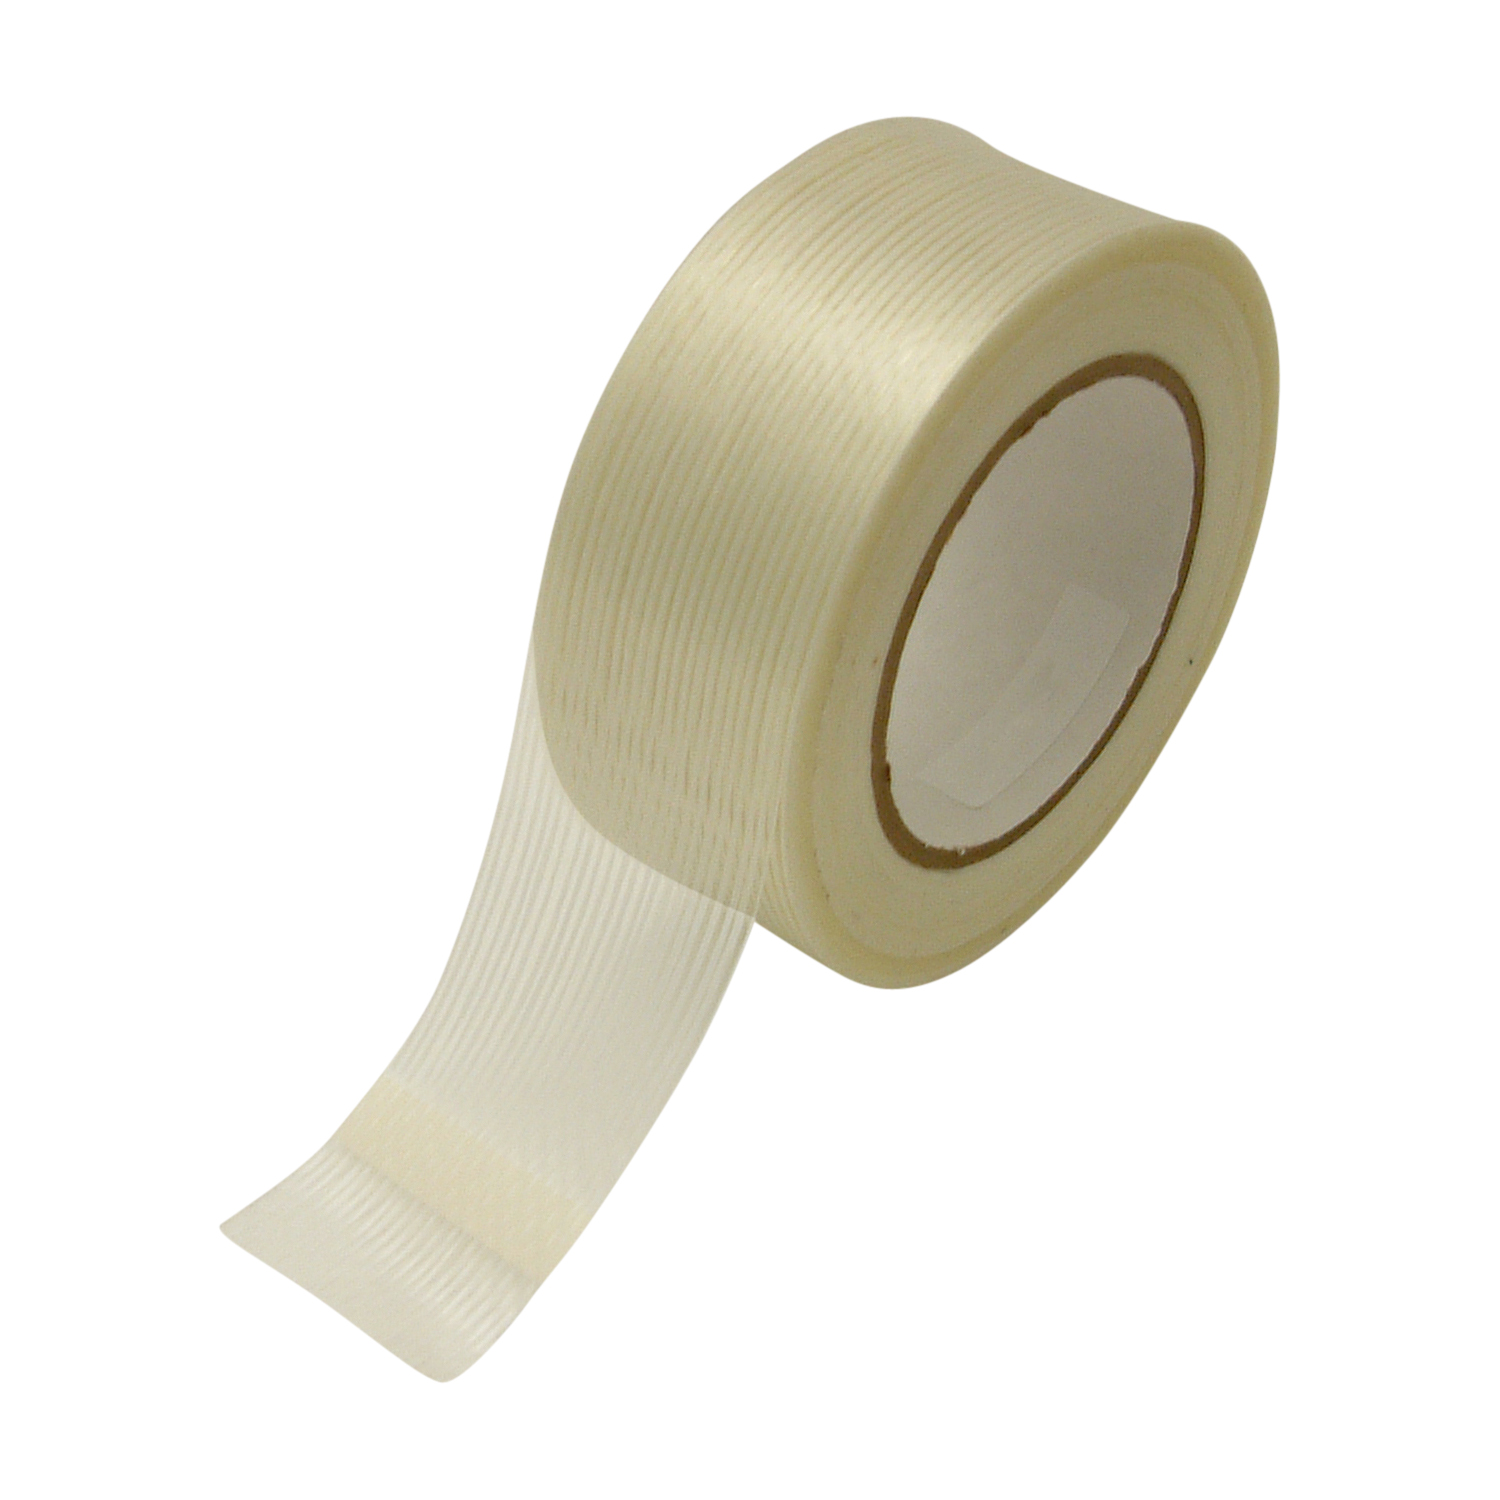 JVCC Mid-Grade Filament Strapping Tape (SFT-130)